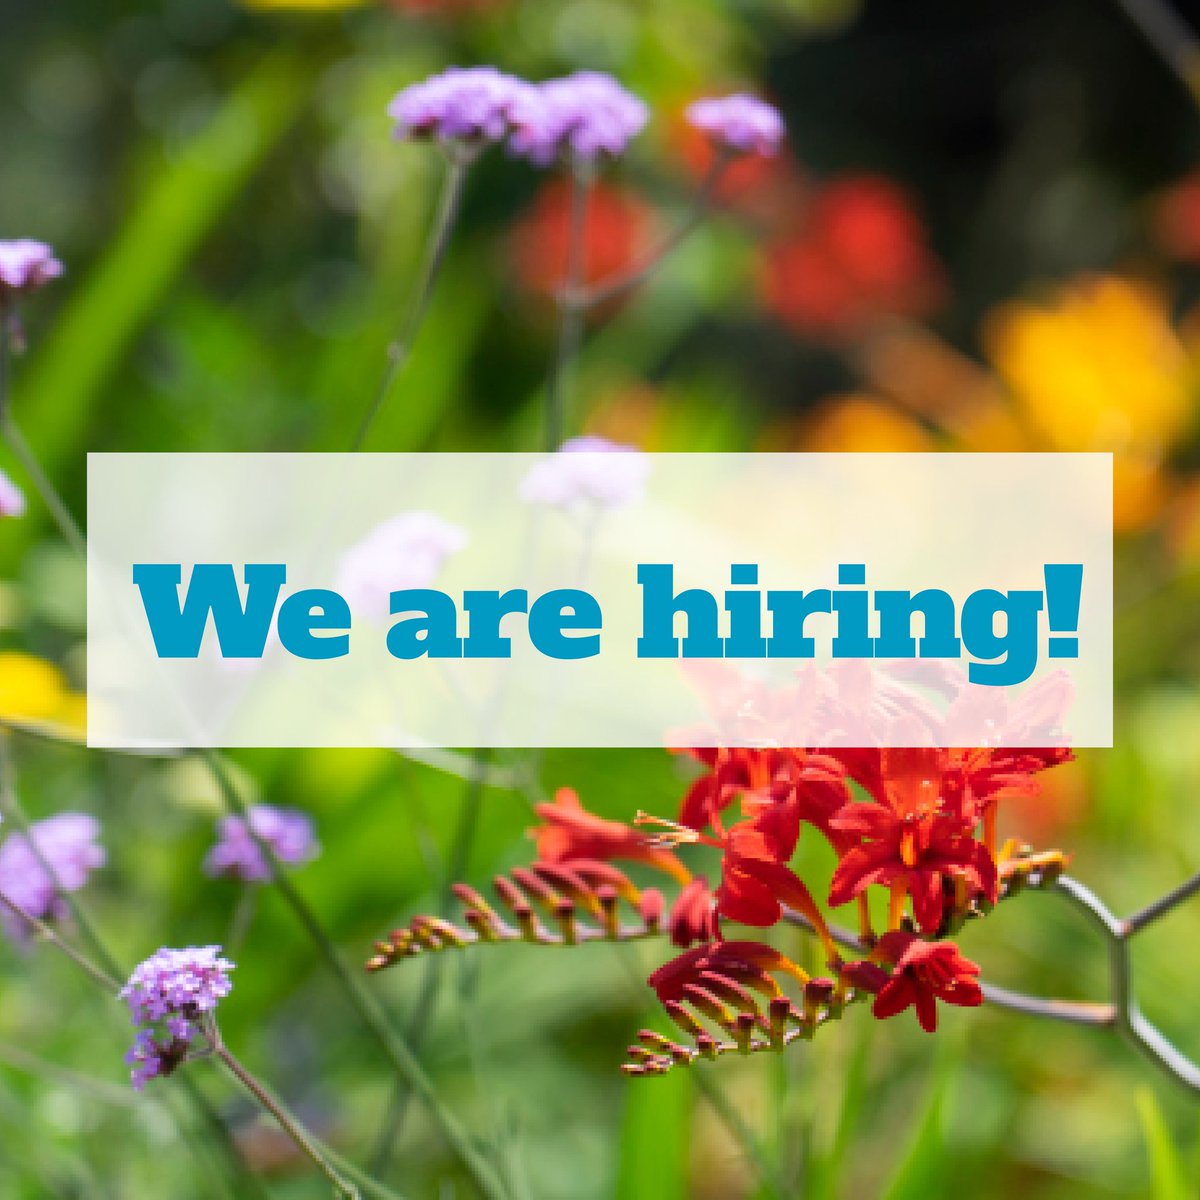 We're on the lookout for a Communications Manager to join our team - someone who’s passionate about making a difference to children, adults and their families in the local community. Could this be you? Find out more here: bit.ly/3OZi10X